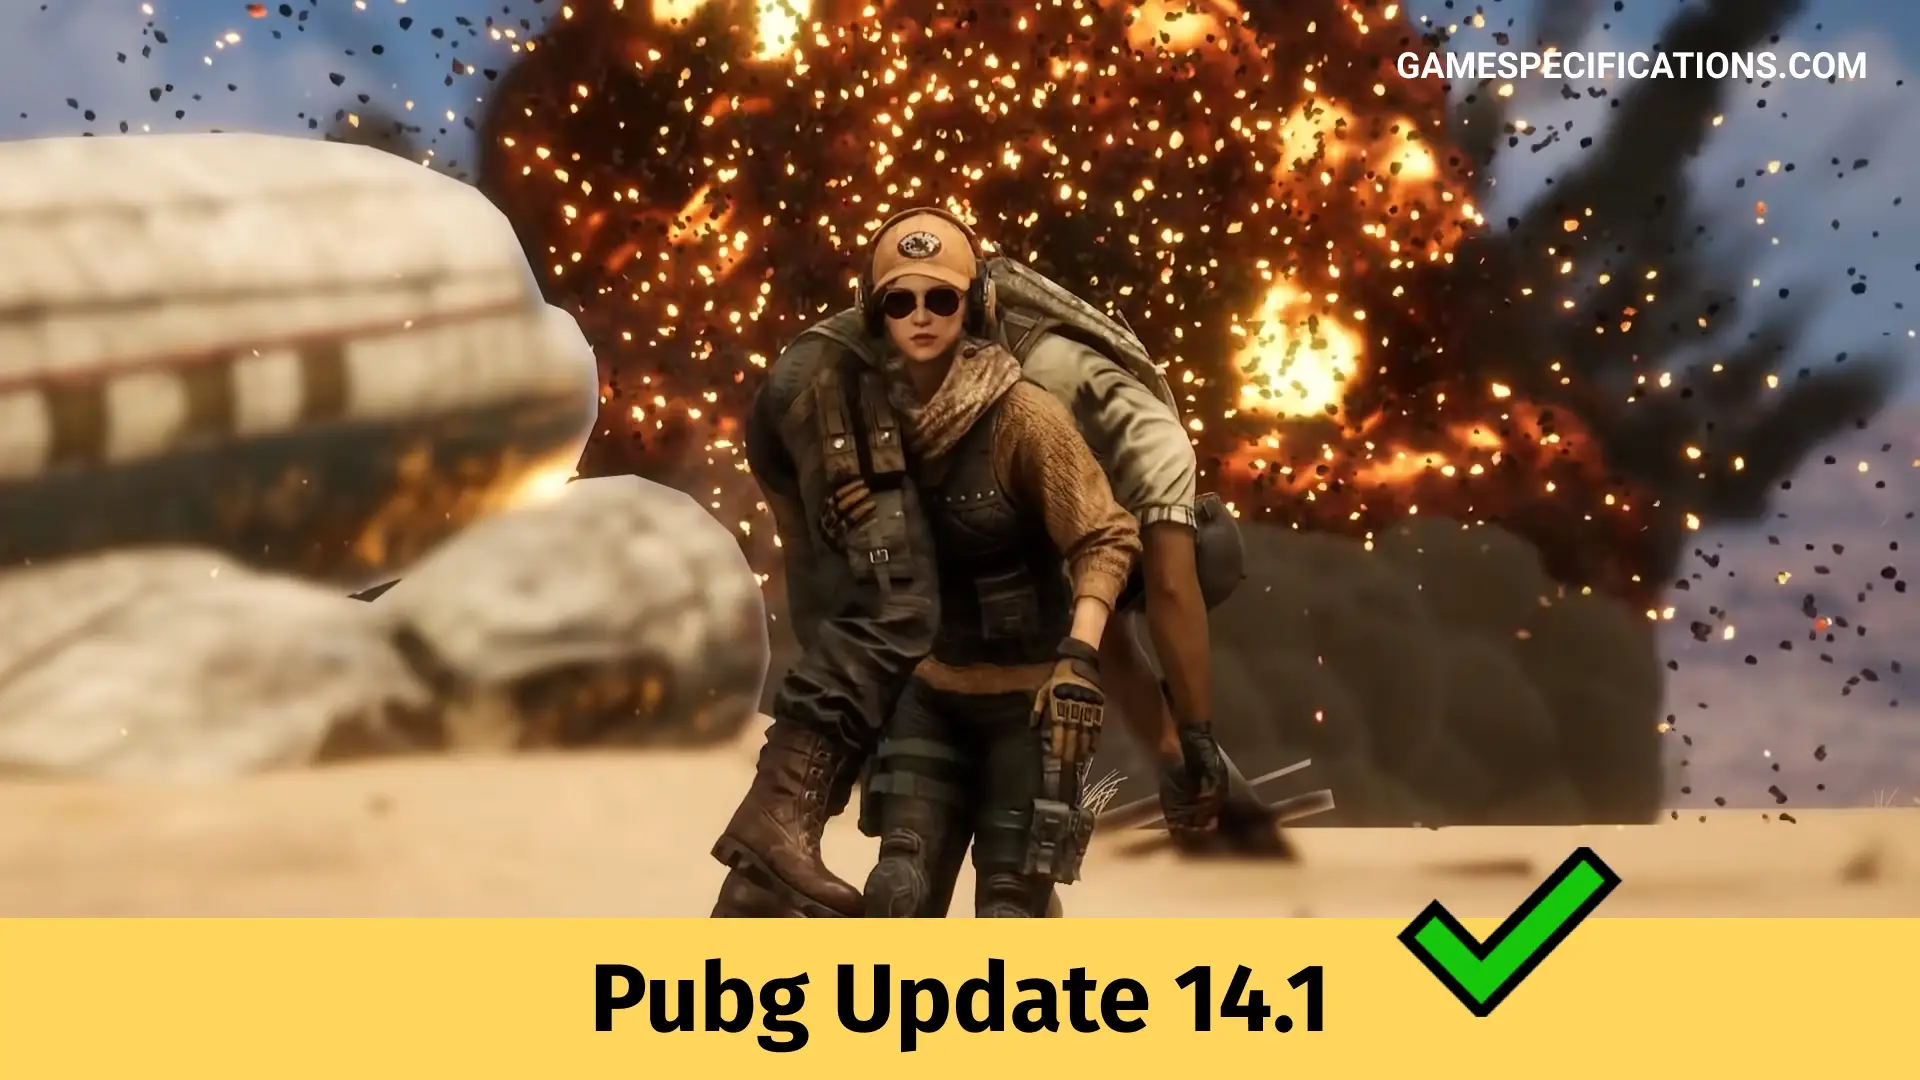 Pubg Update 14.1: All You Need To Know